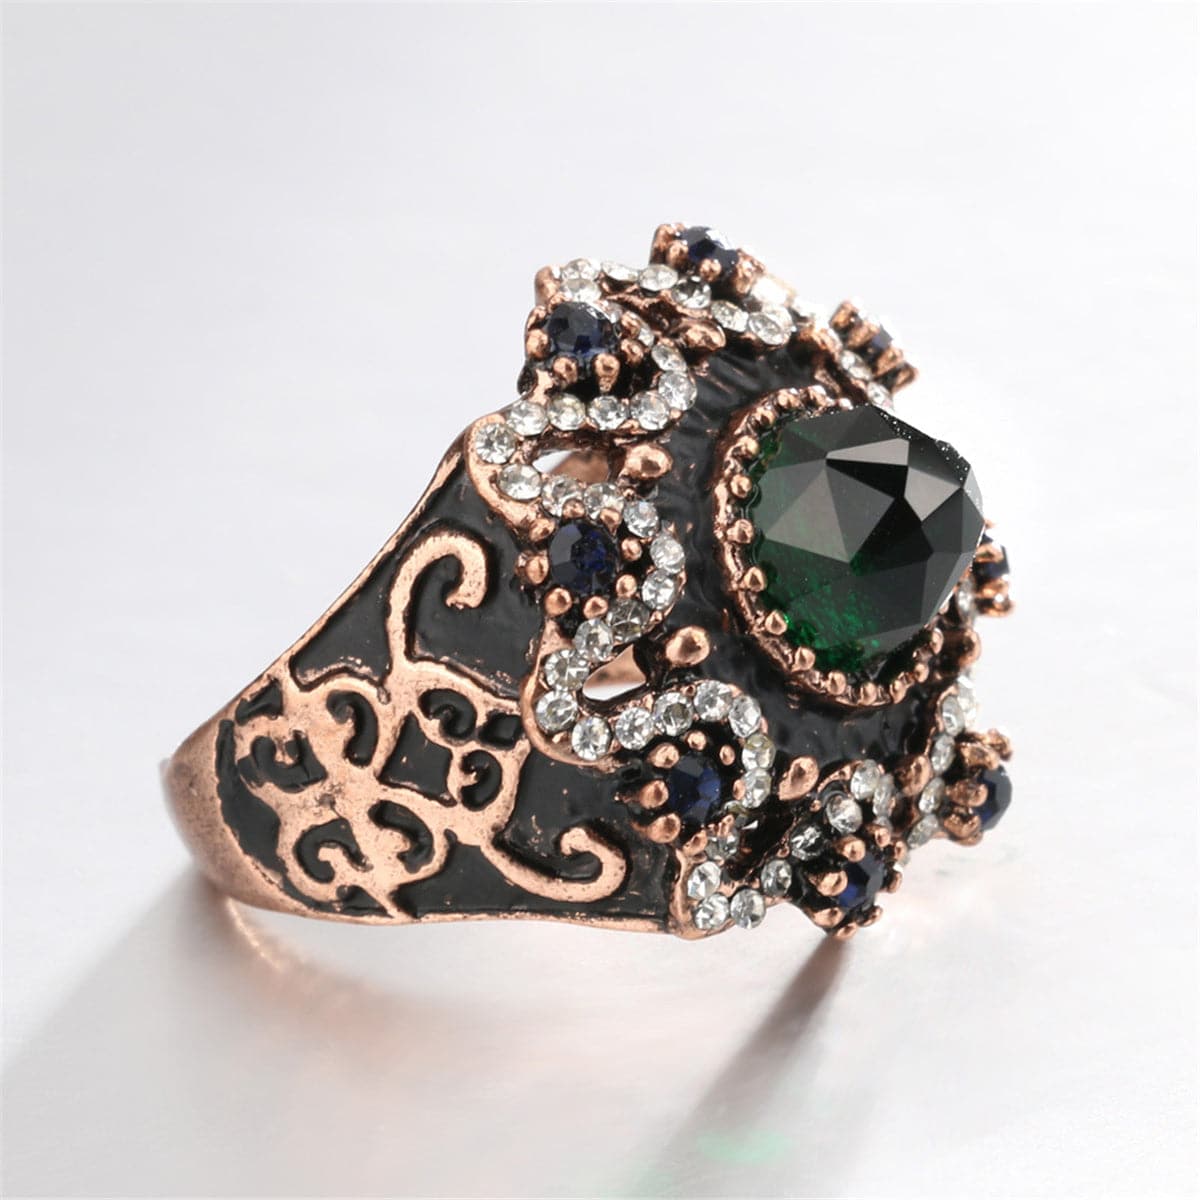 Green Crystal & Cubic Zirconia Floral Pattern Ring